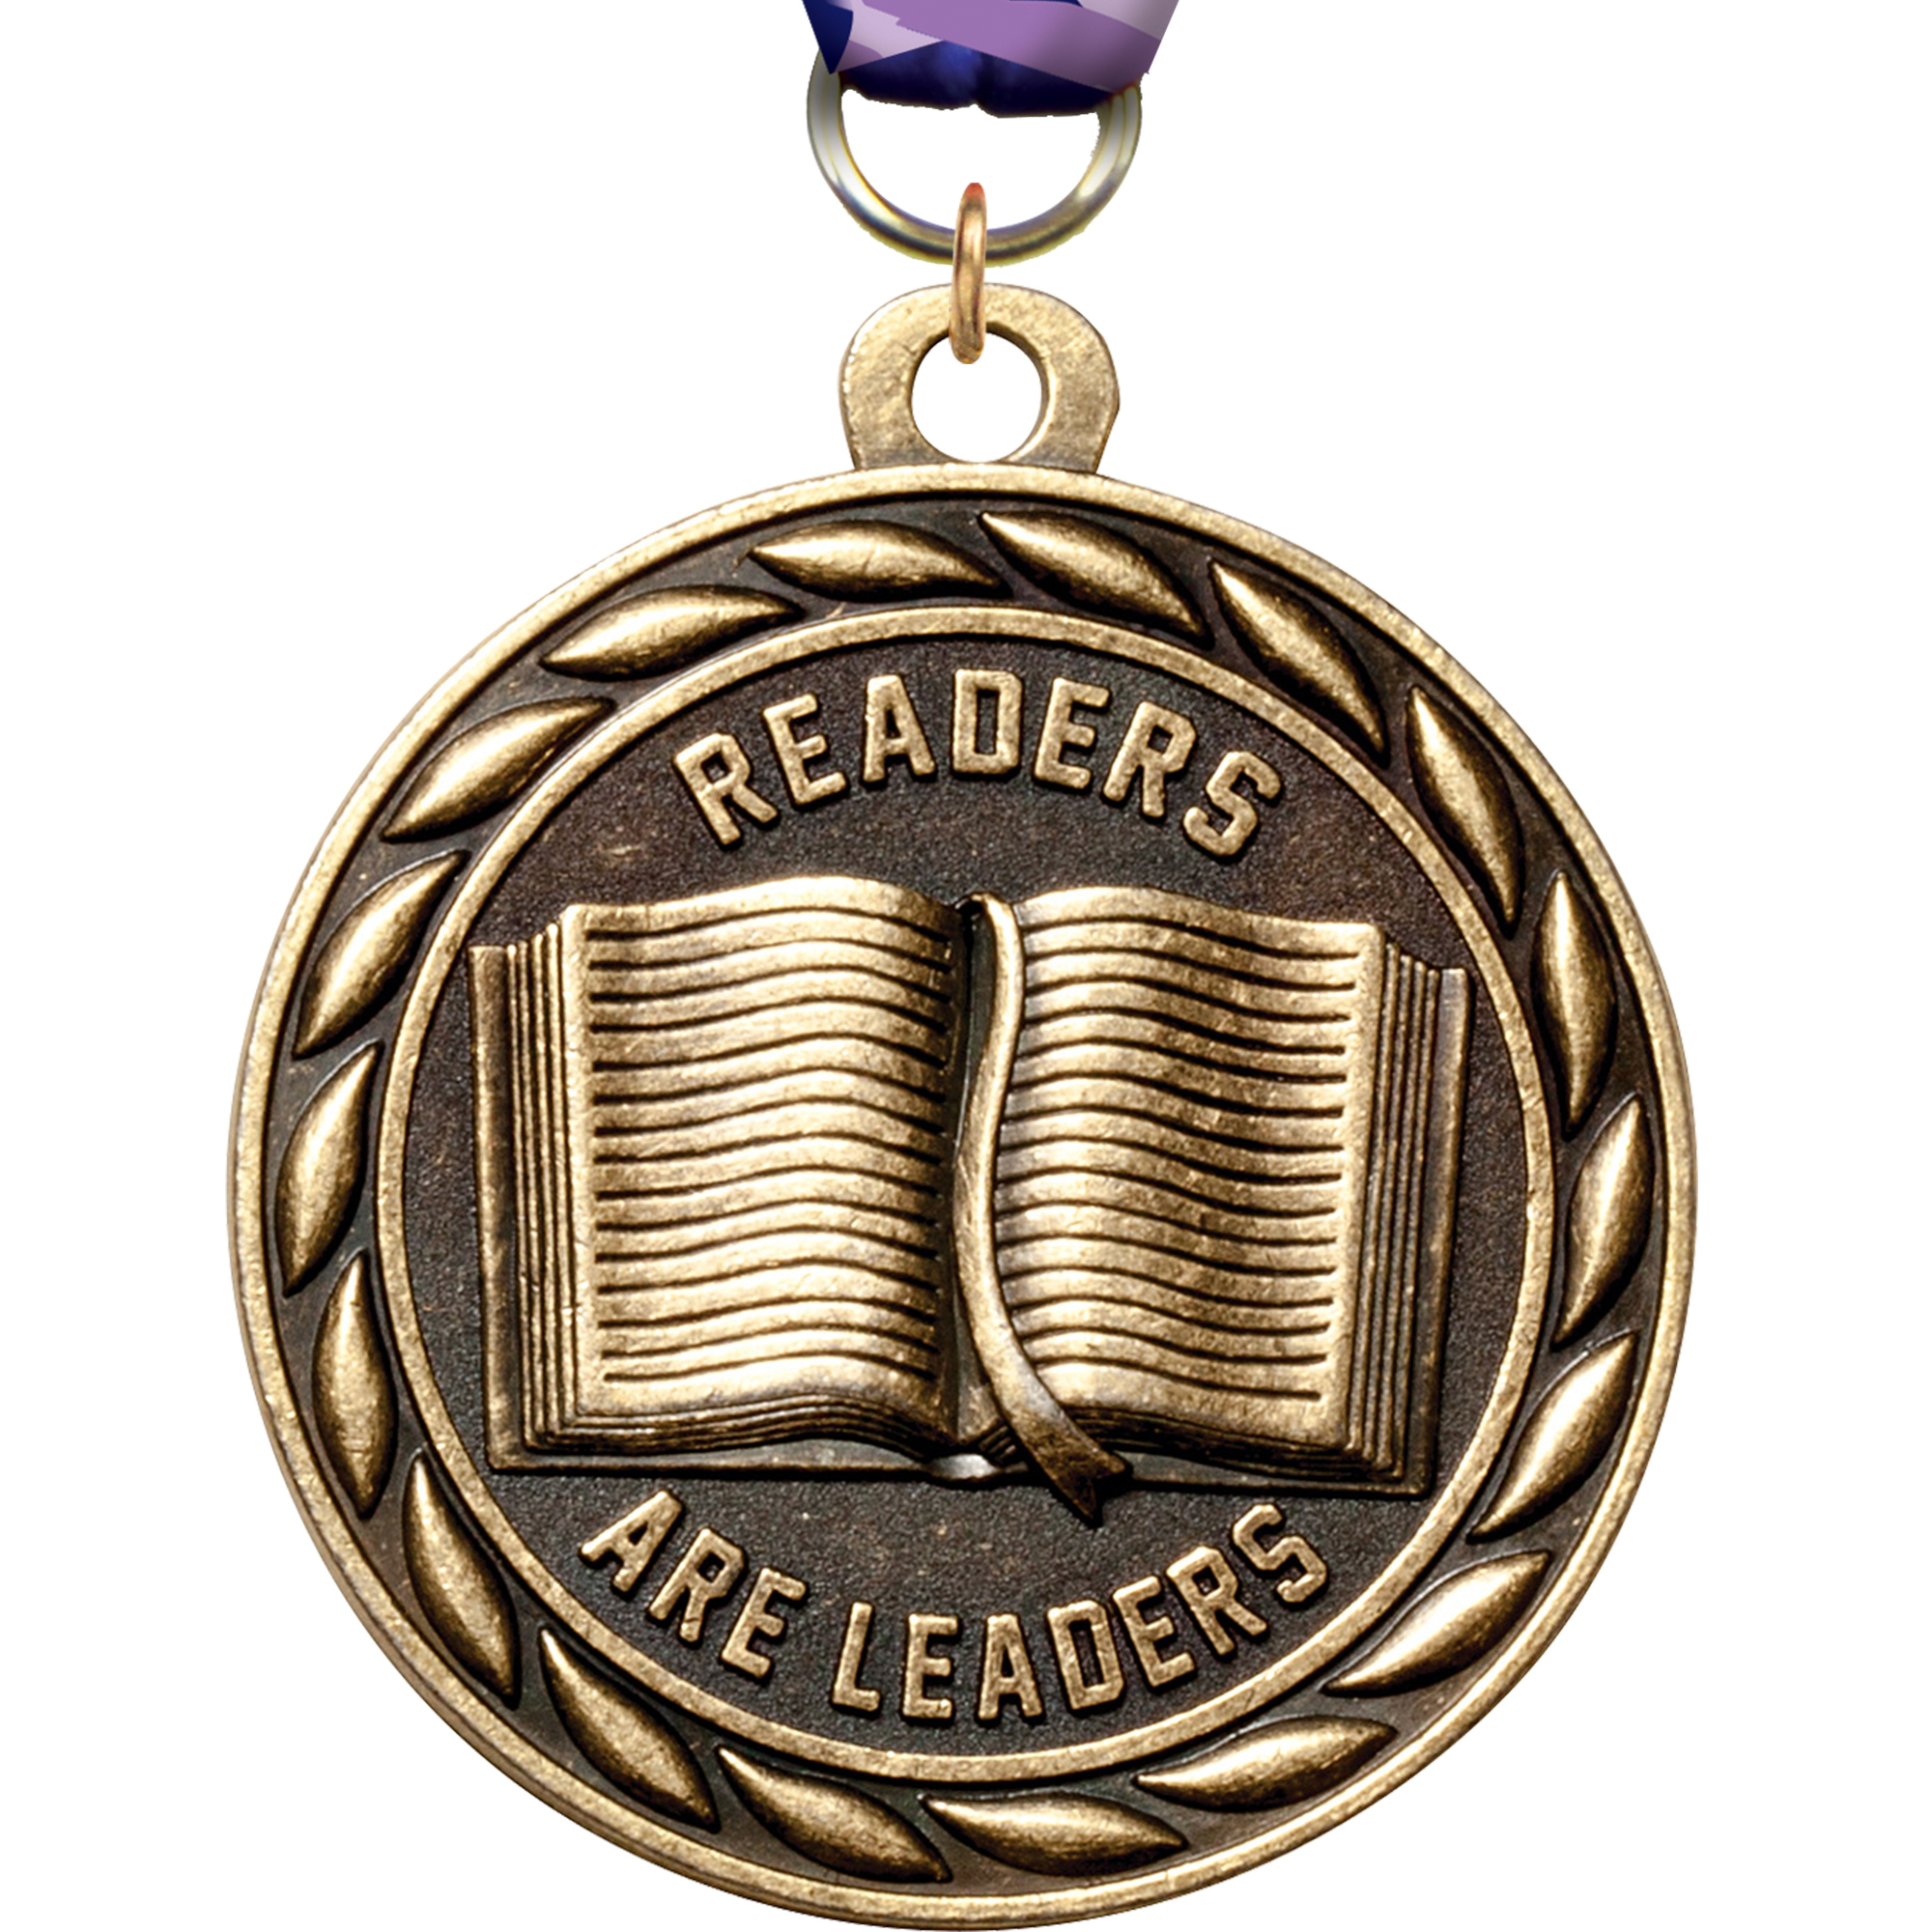 Readers are Leaders Scholastic Medal- Gold